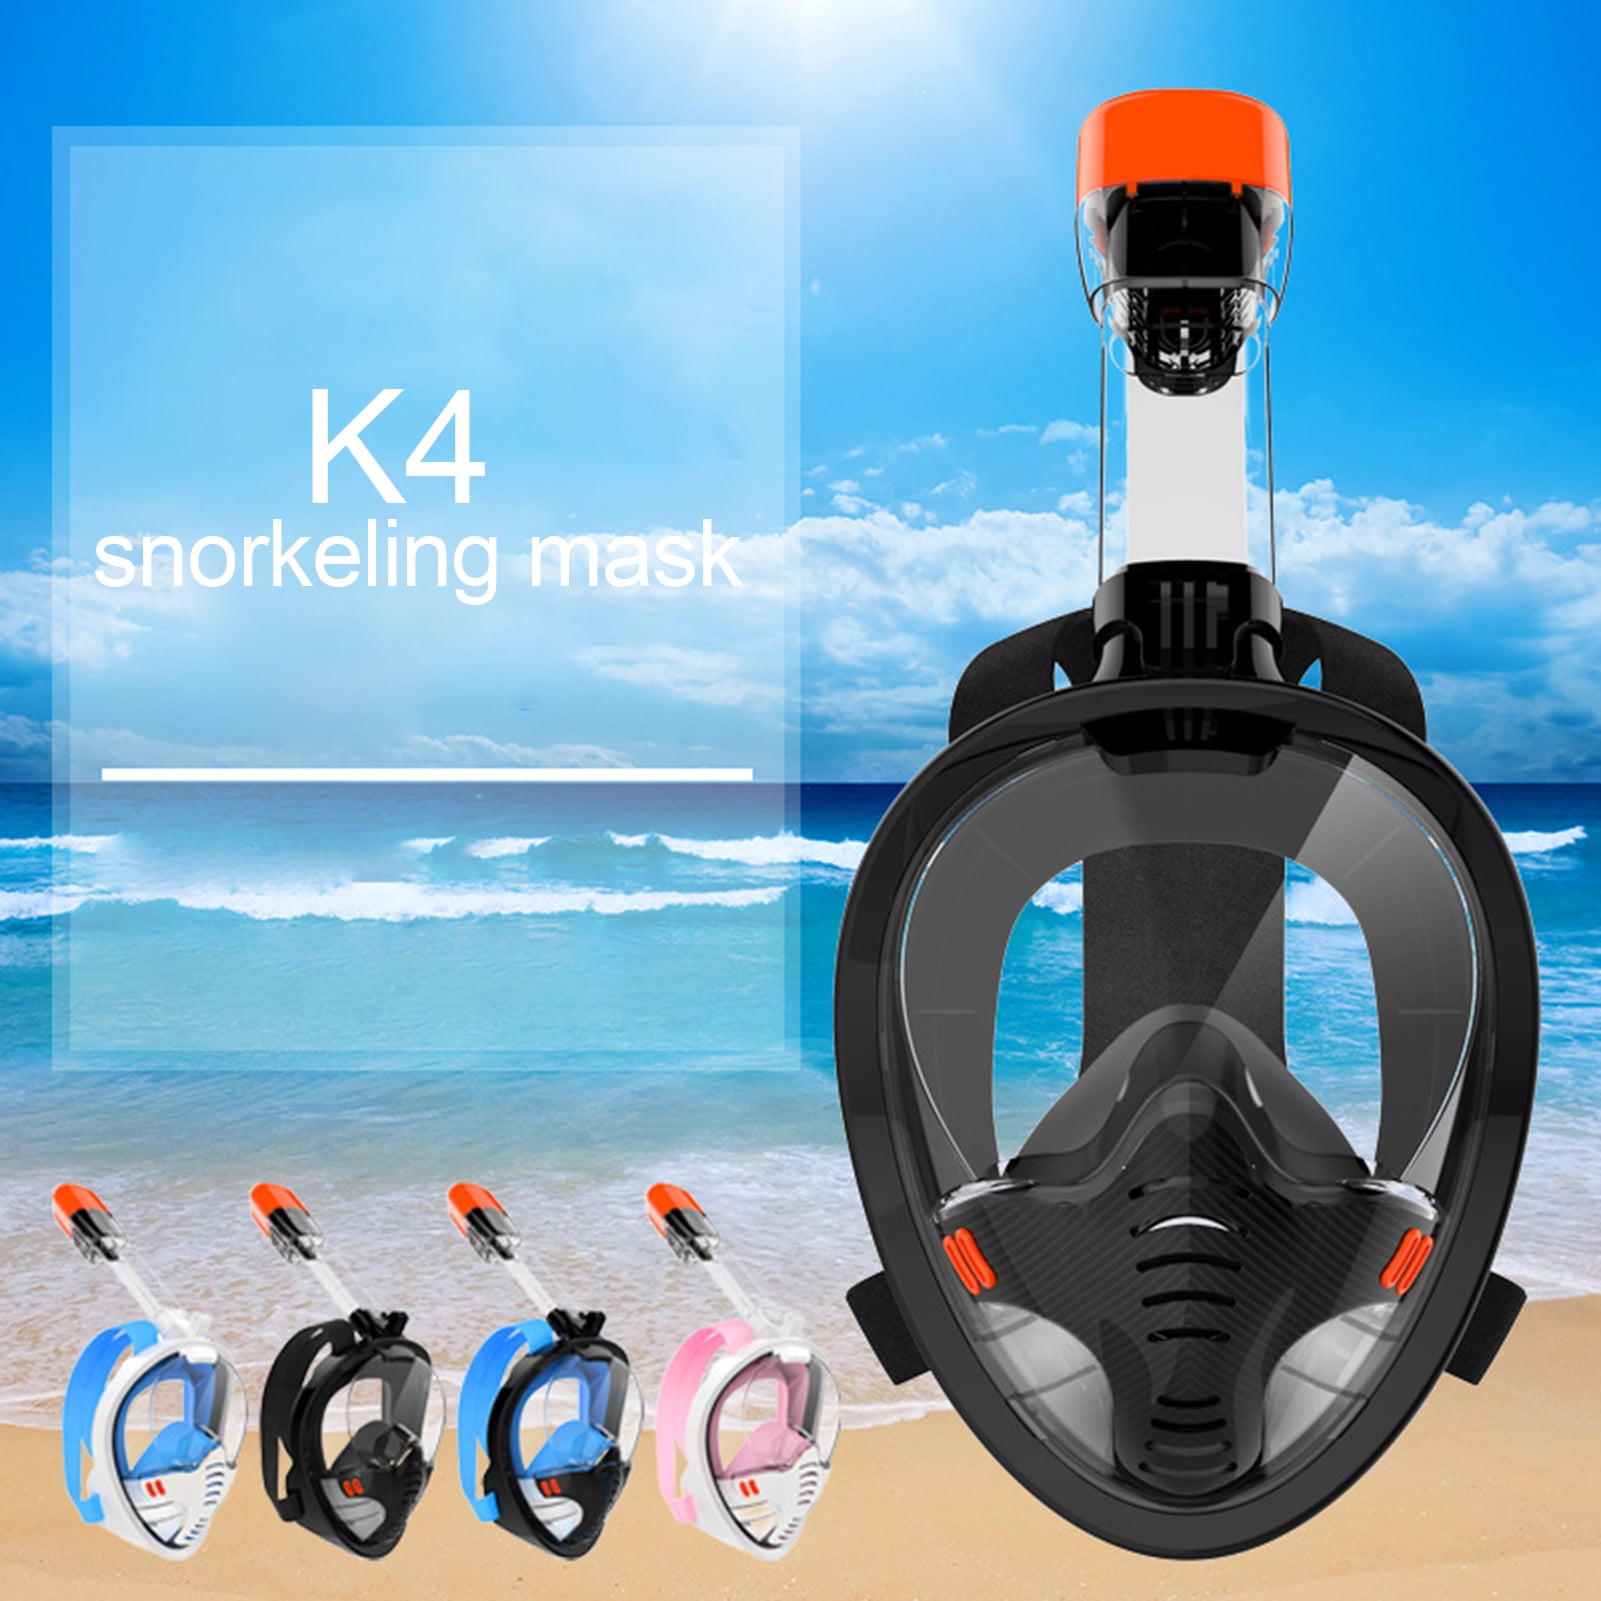 travel mask and snorkel